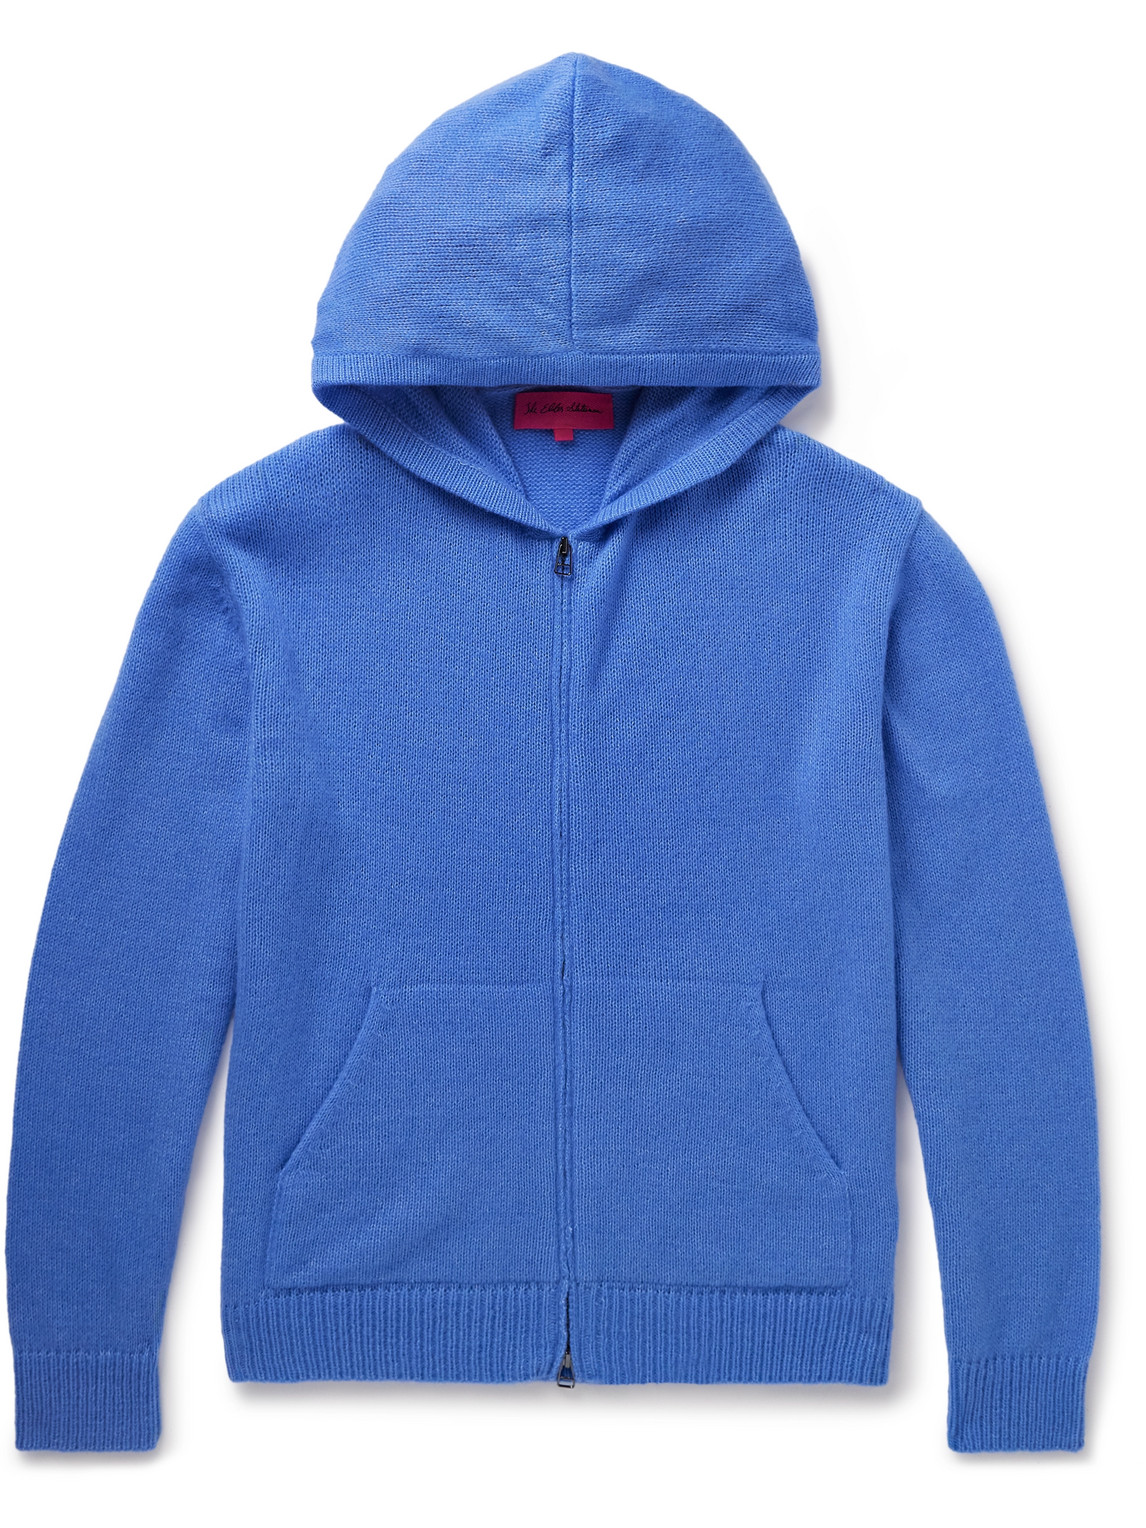 Nimbus Cashmere and Cotton-Blend Zip-Up Hoodie